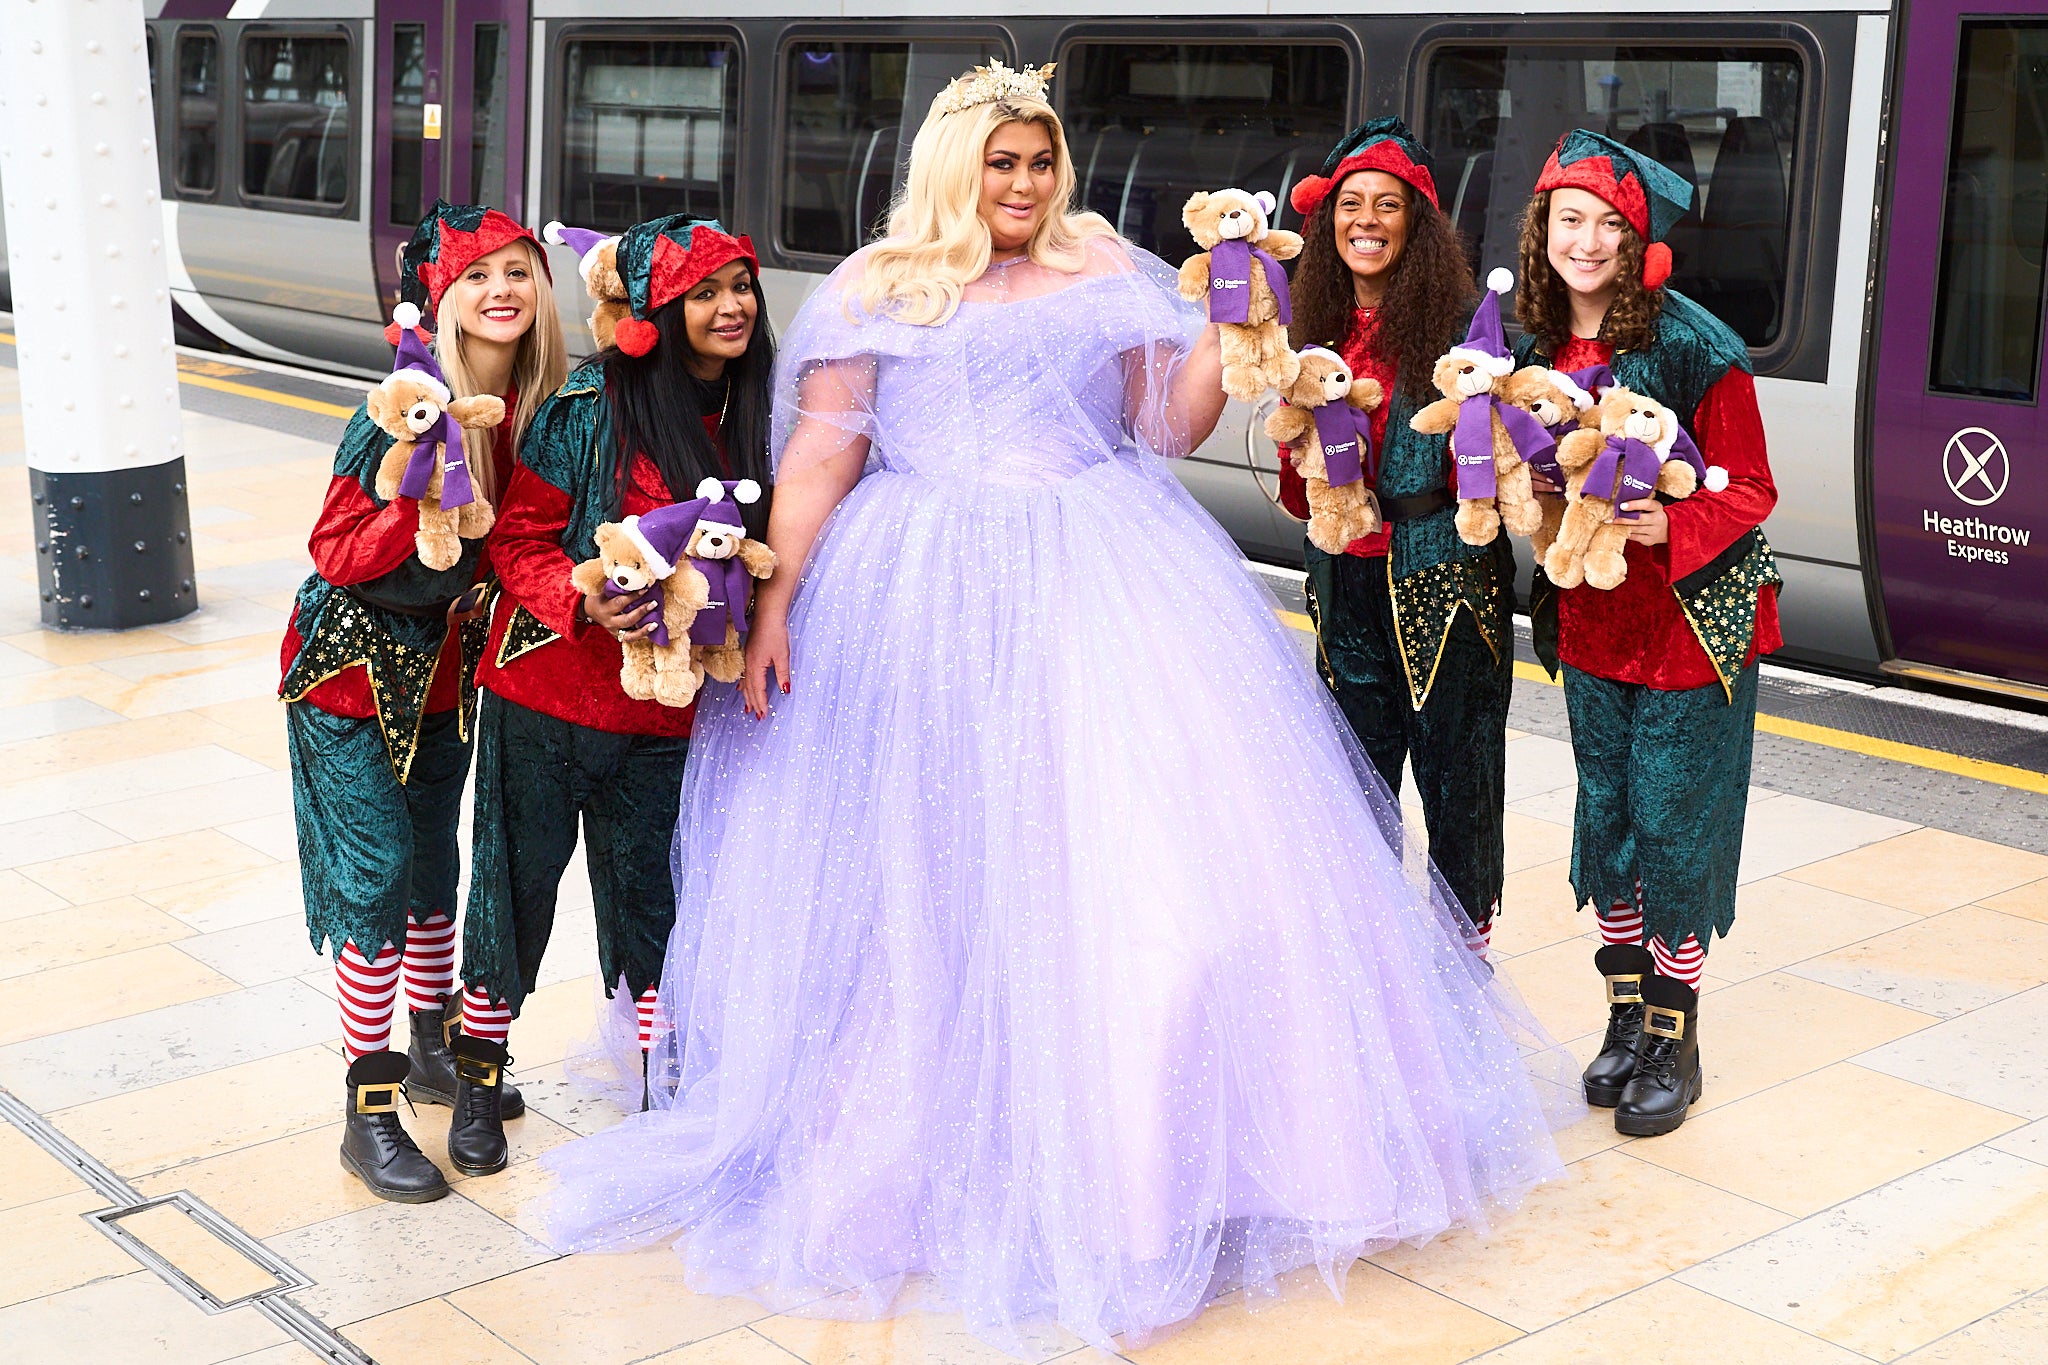 Gemma lit up the platform in a dazzling Fairy Godmother gown